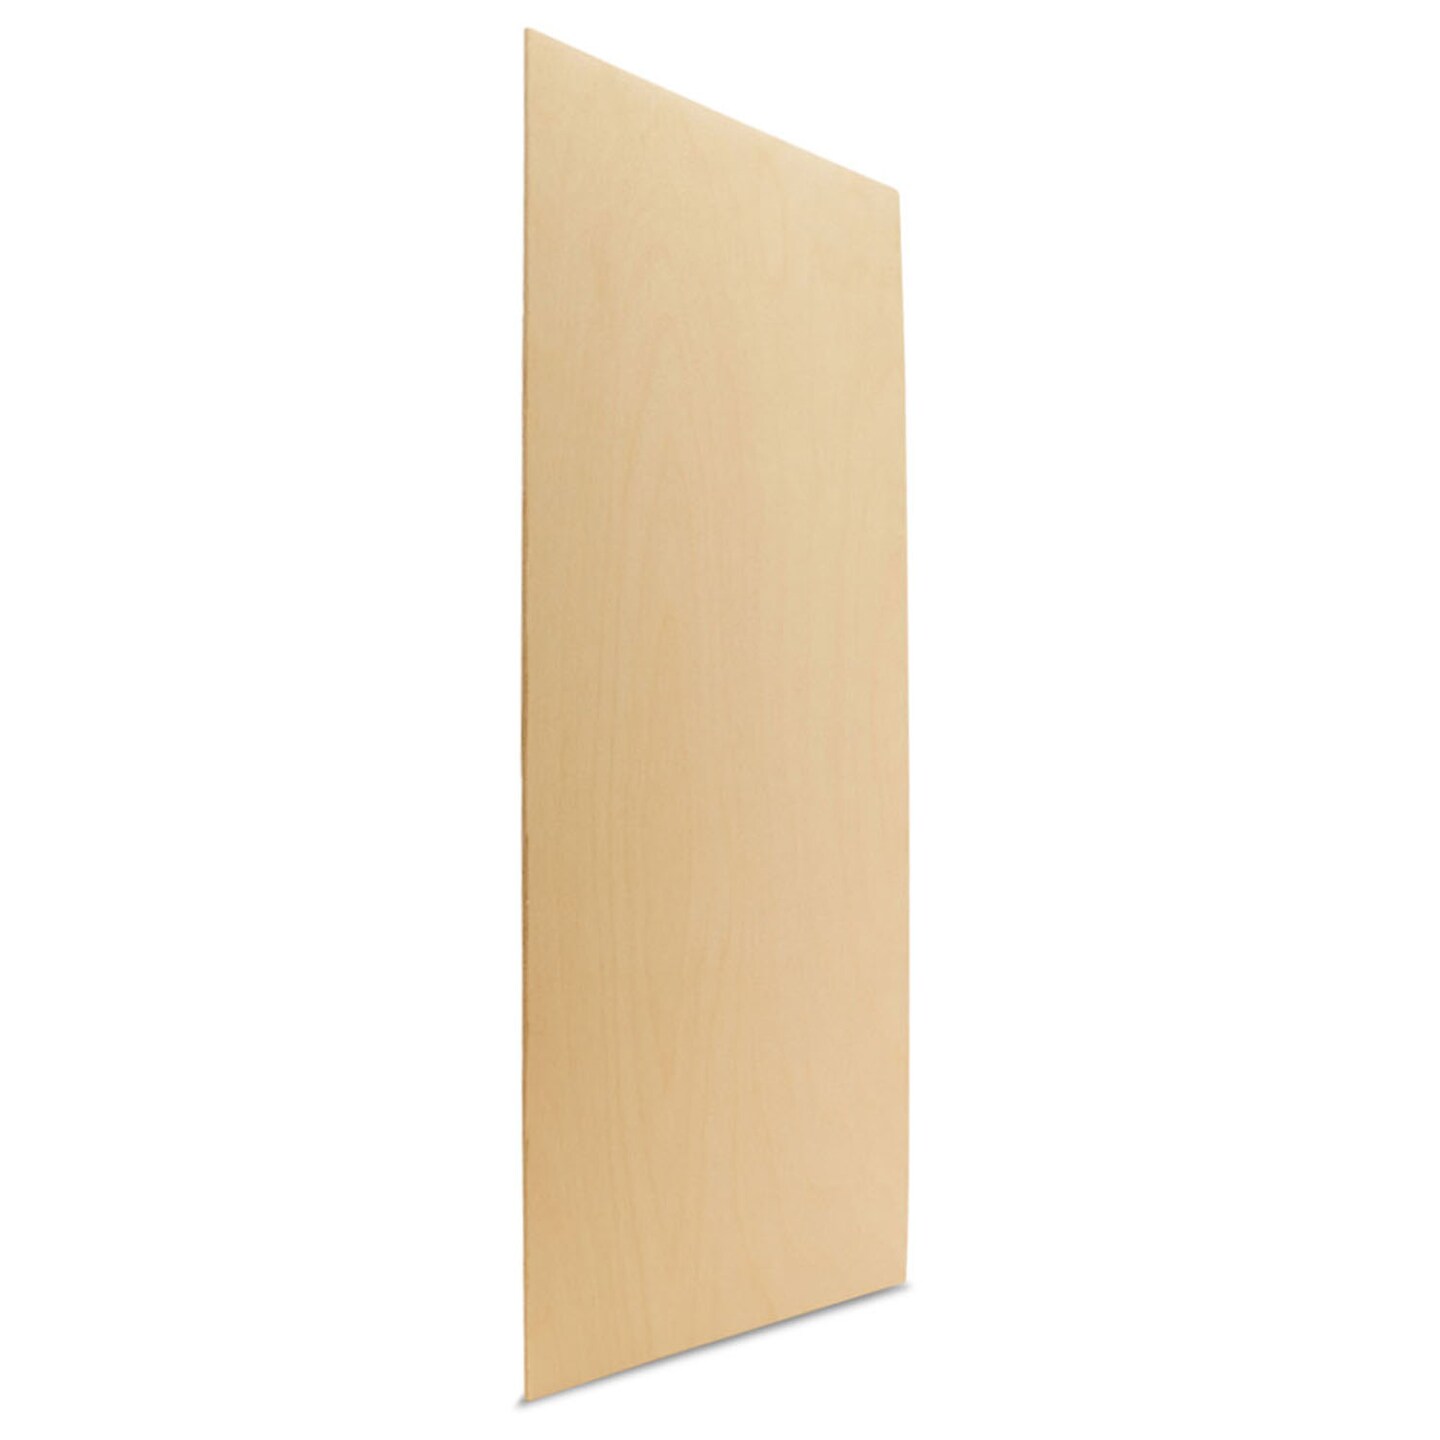 Baltic Birch Plywood, 3 mm 1/8 x 12 x 20 Inch Craft Wood, Pack of 12 B/BB  Grade Baltic Birch Sheets, Perfect for Laser, CNC Cutting and Wood Burning,  by Woodpeckers 